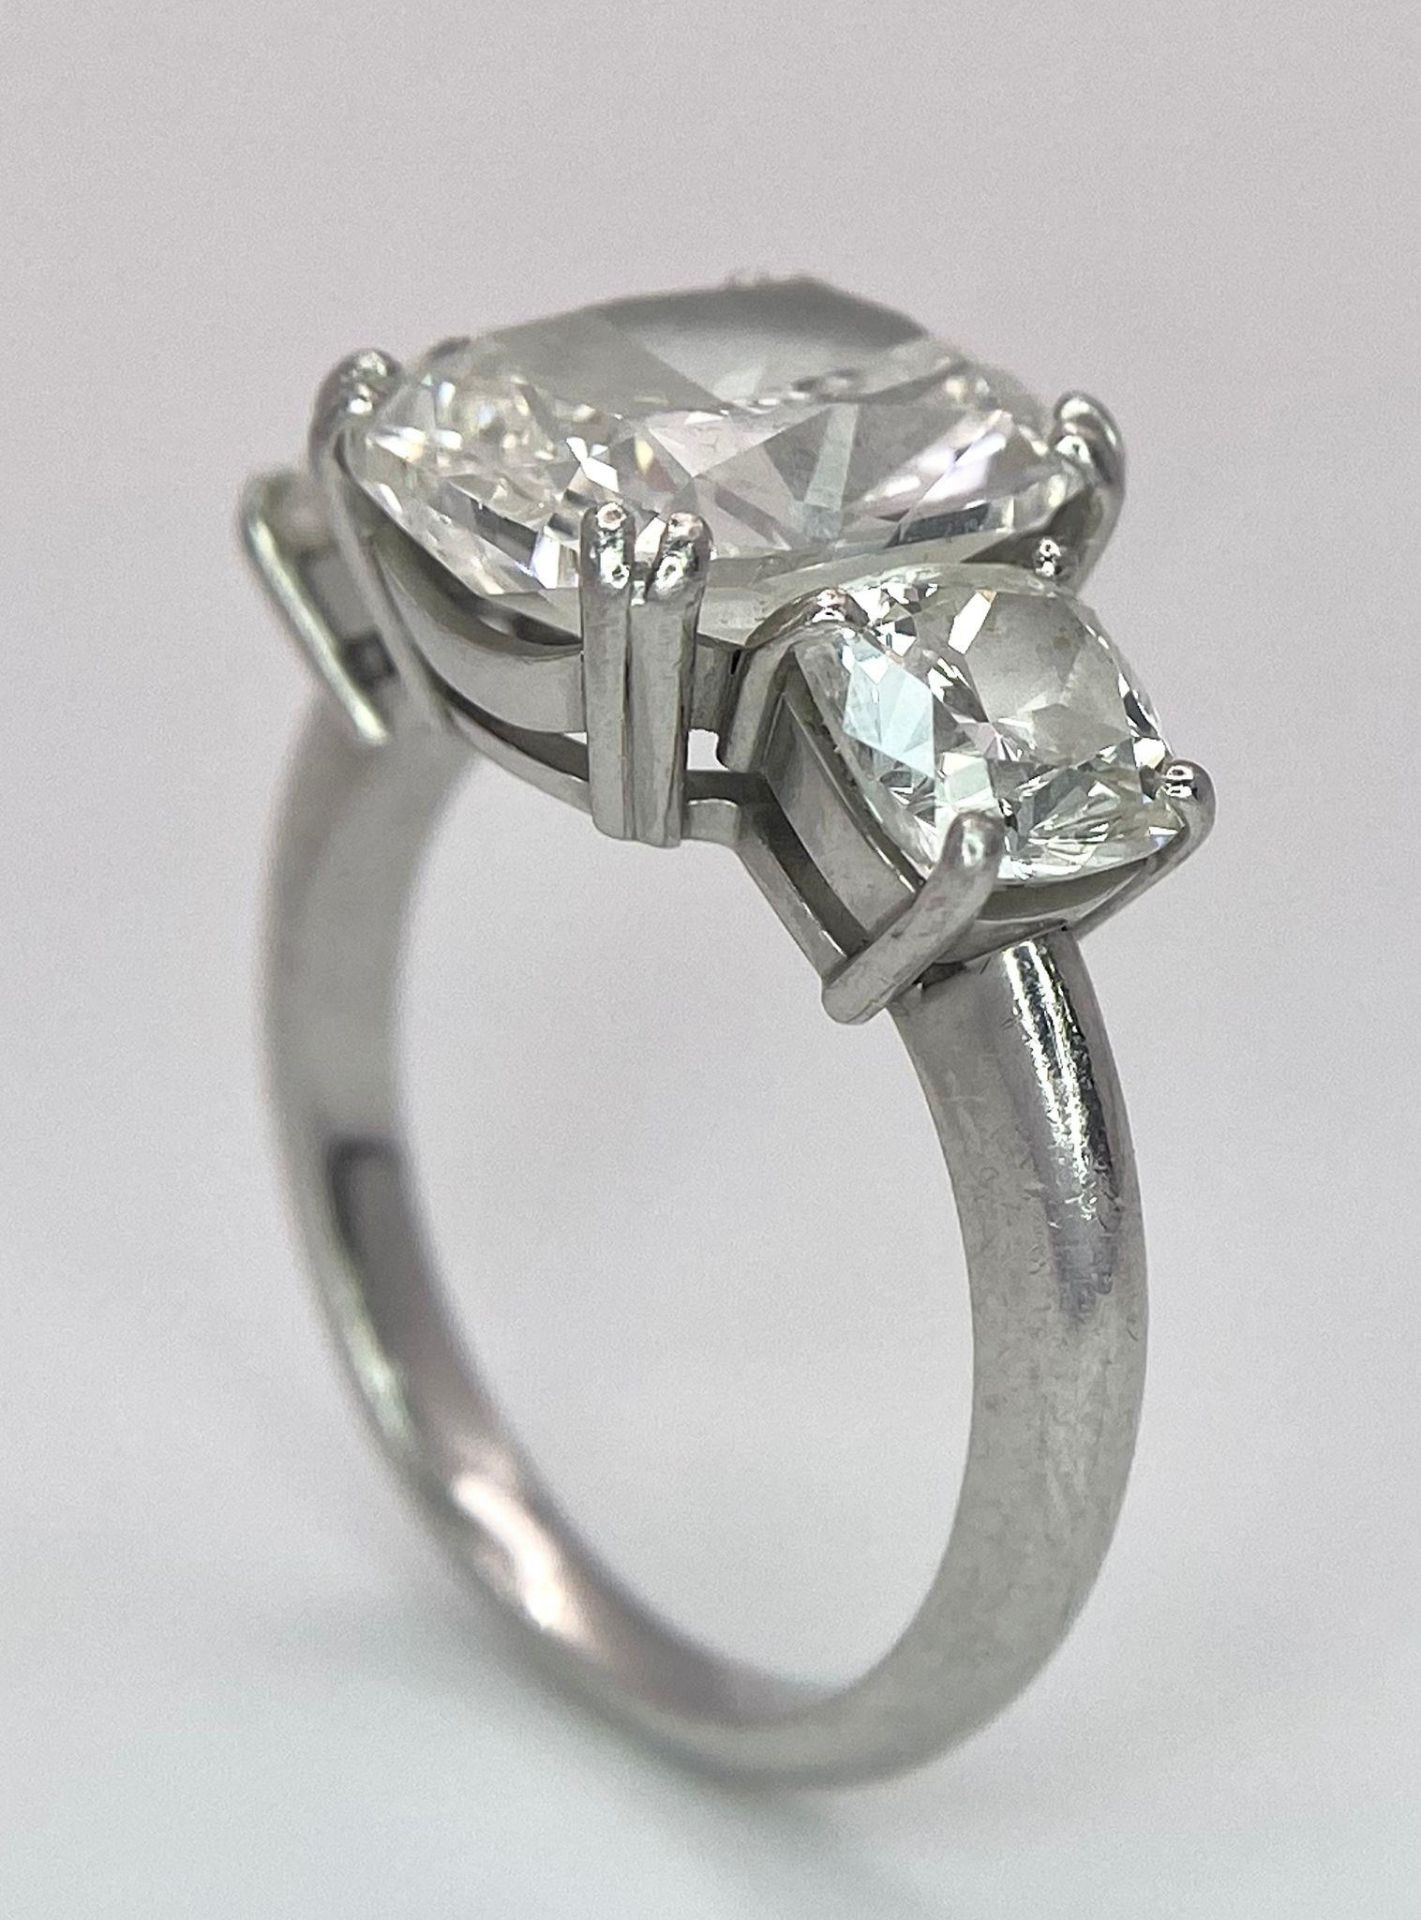 A Breathtaking 4.01ct GIA Certified Diamond Ring. A brilliant cushion cut 4.01ct central diamond - Image 9 of 21